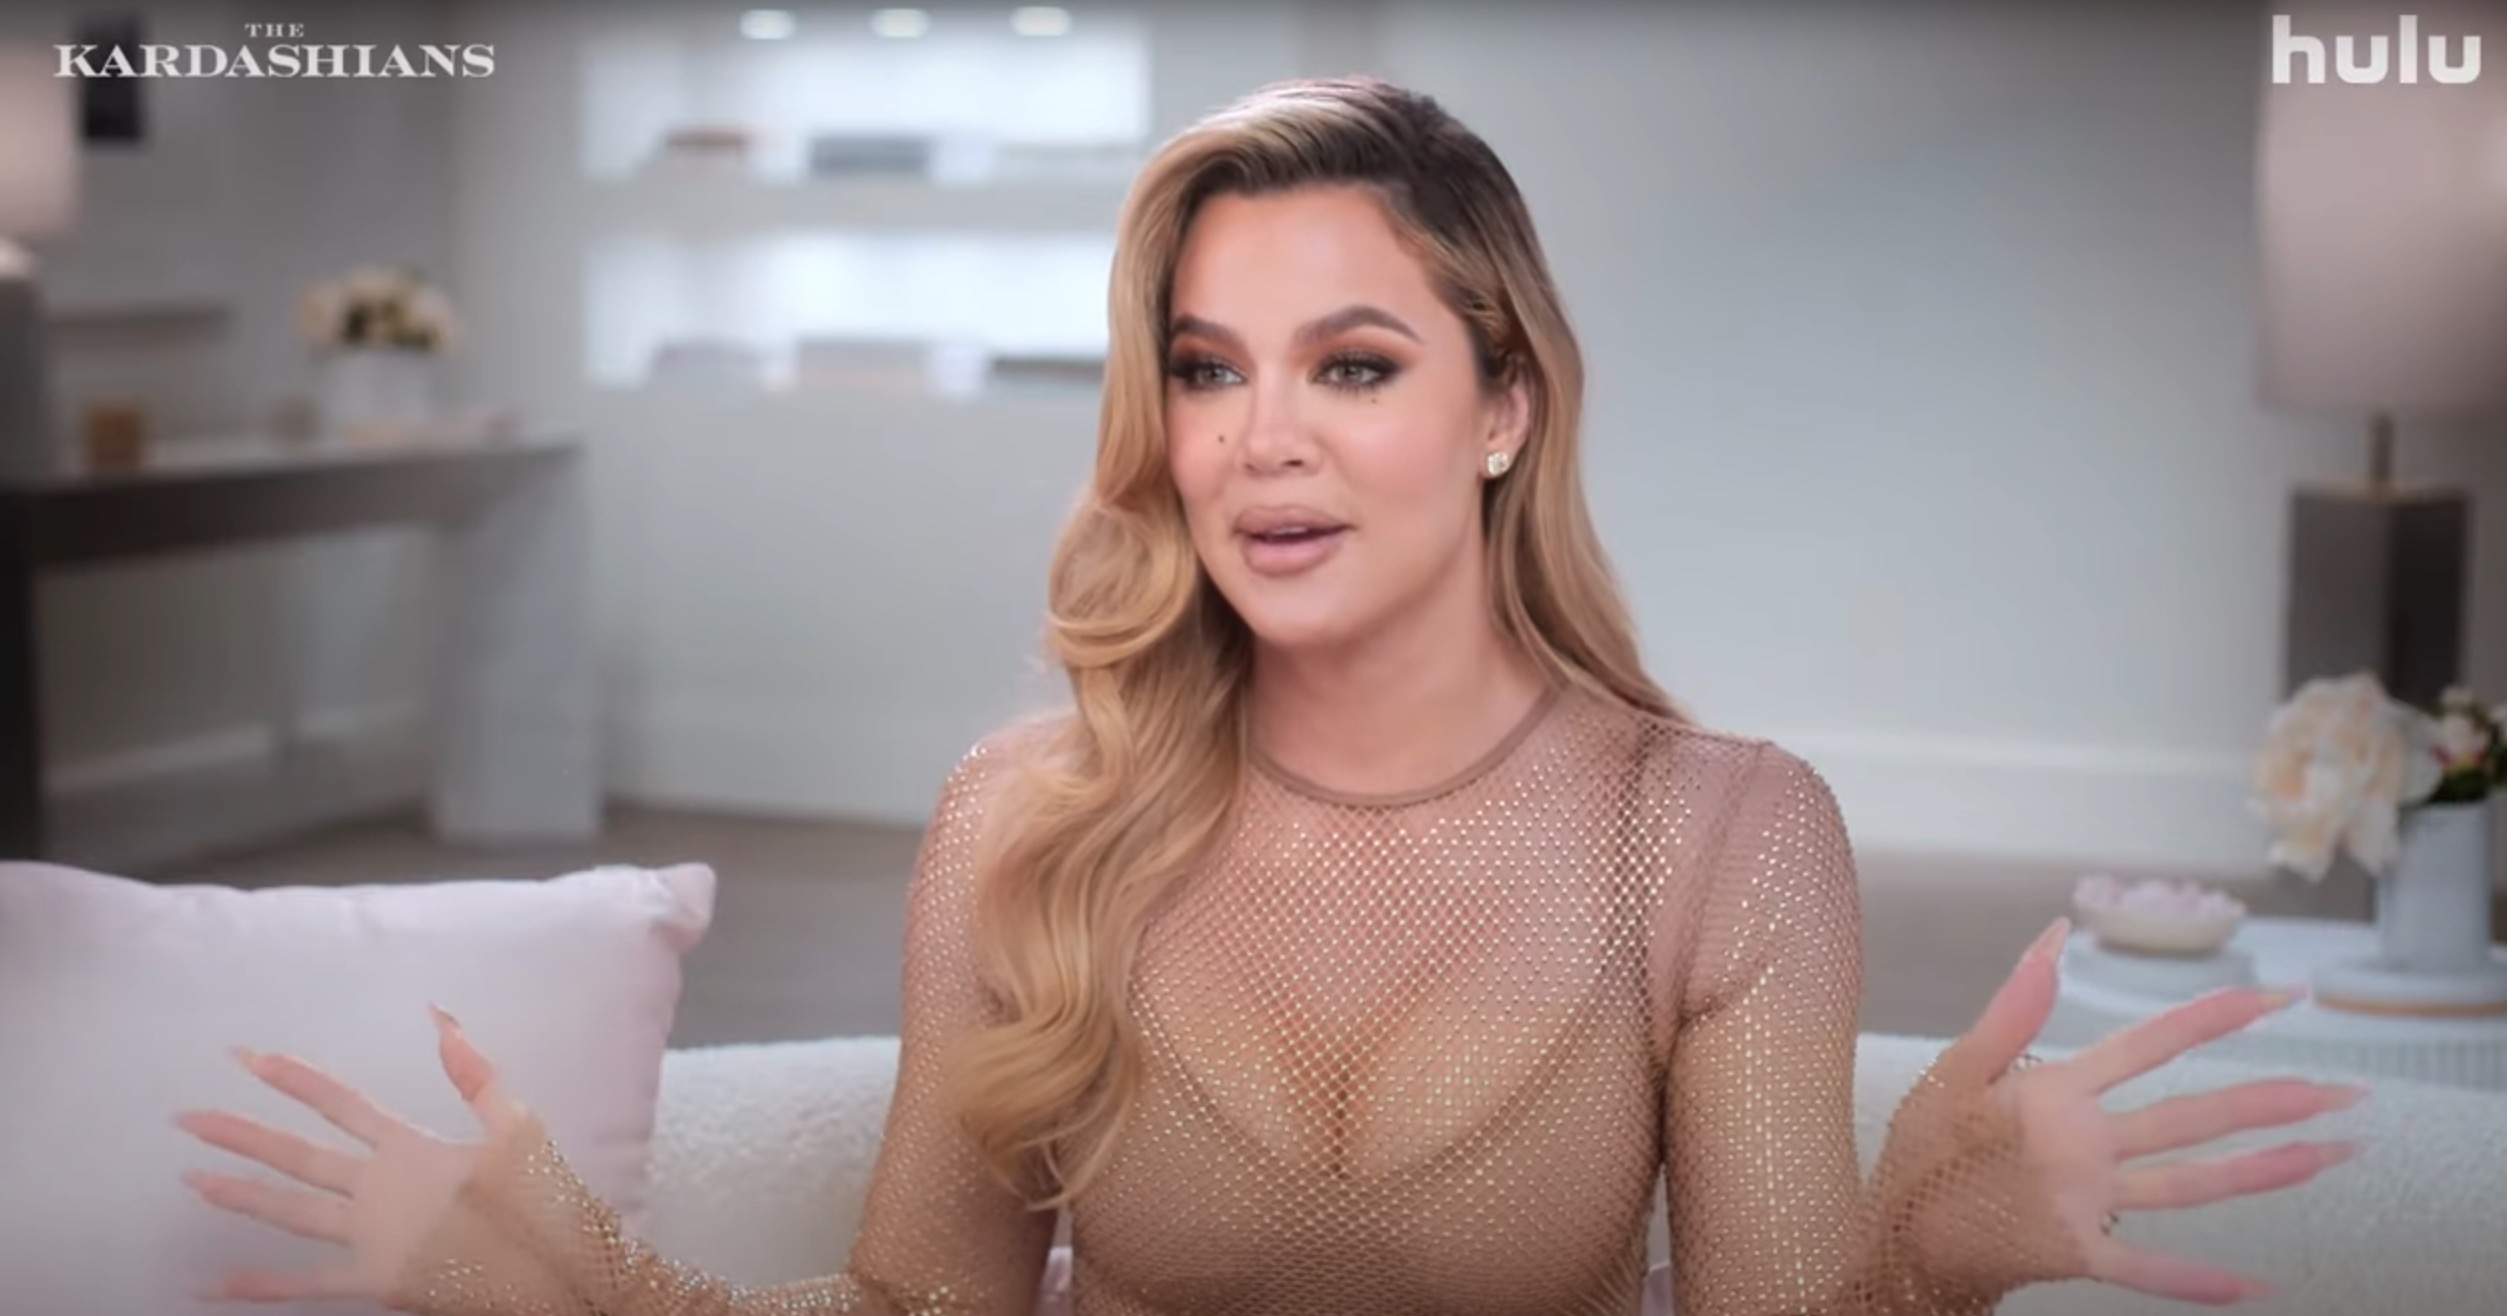 She revealed the many things she does for her children on The Kardashians